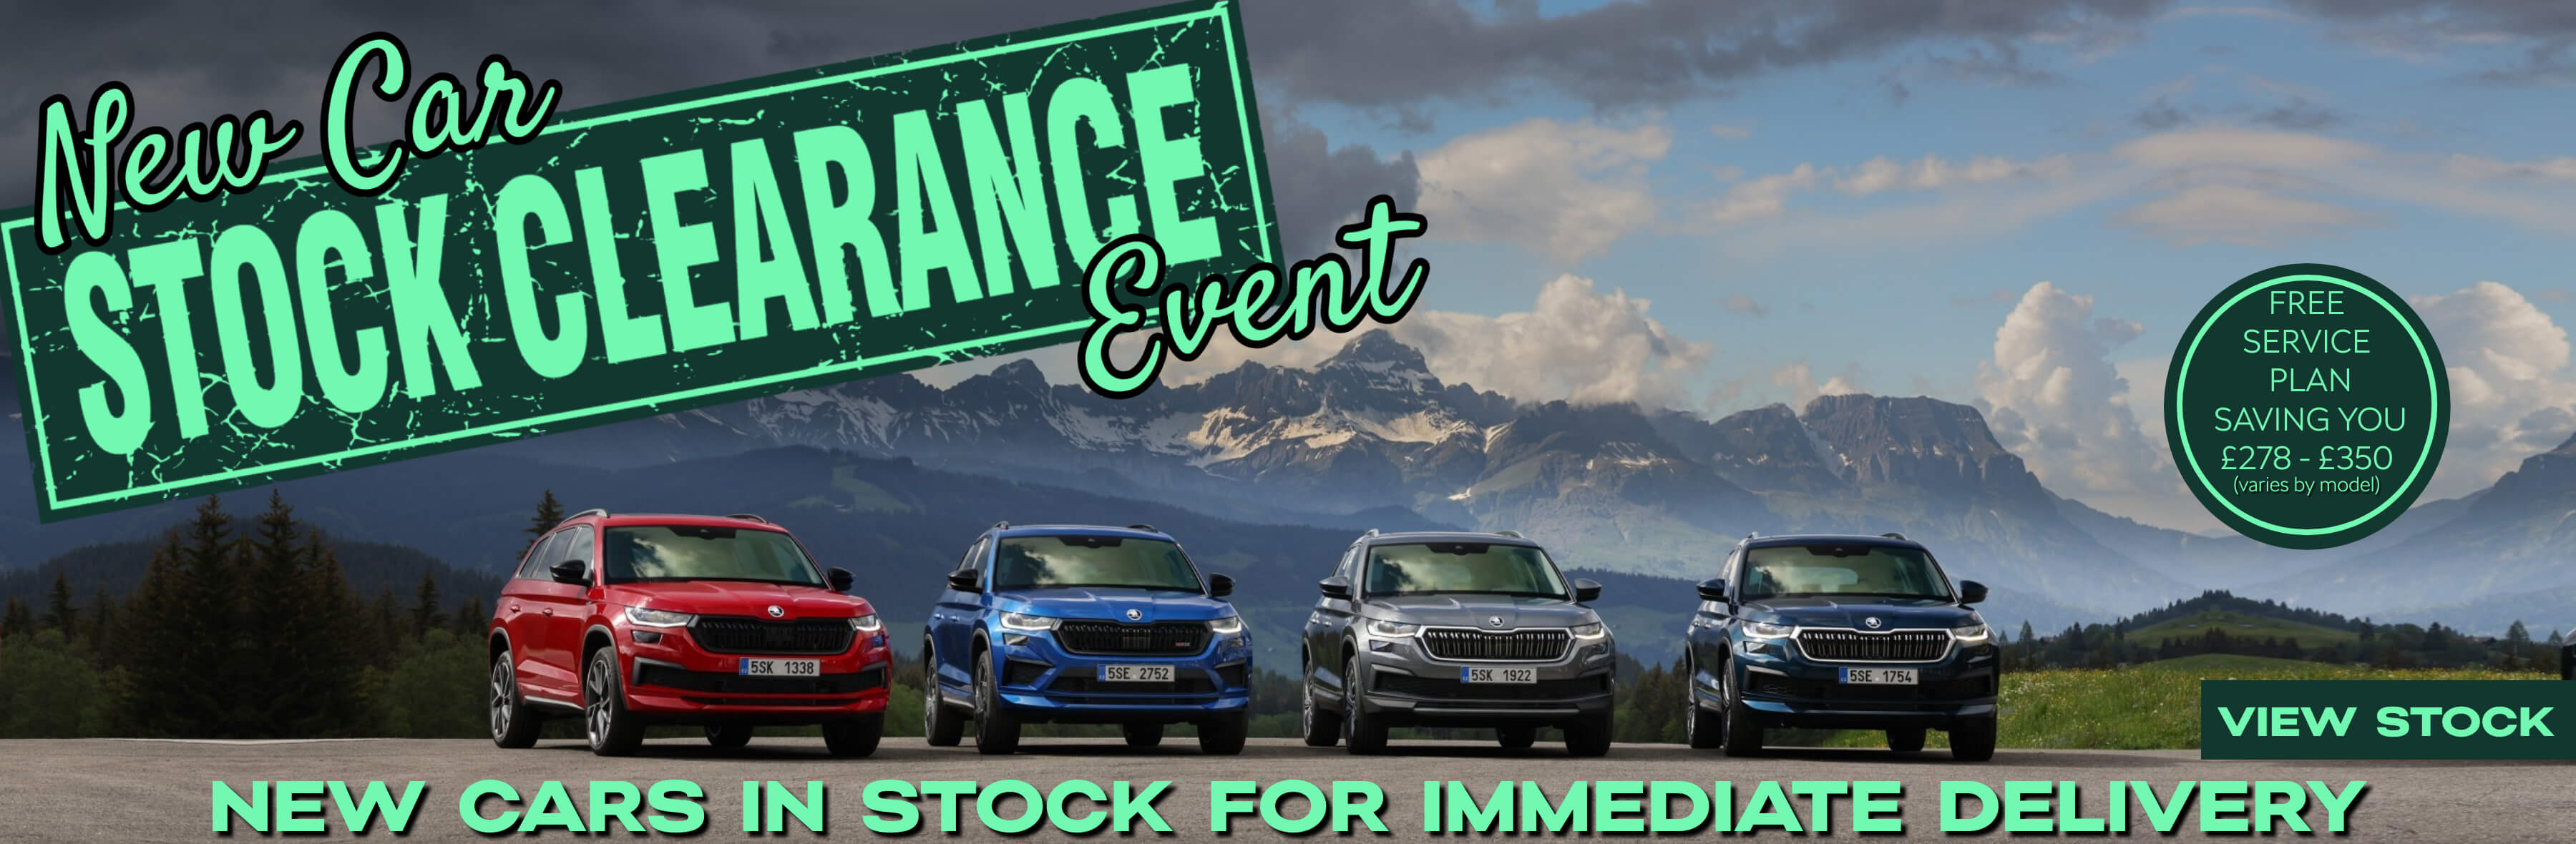 New Car Stock Clearance Event